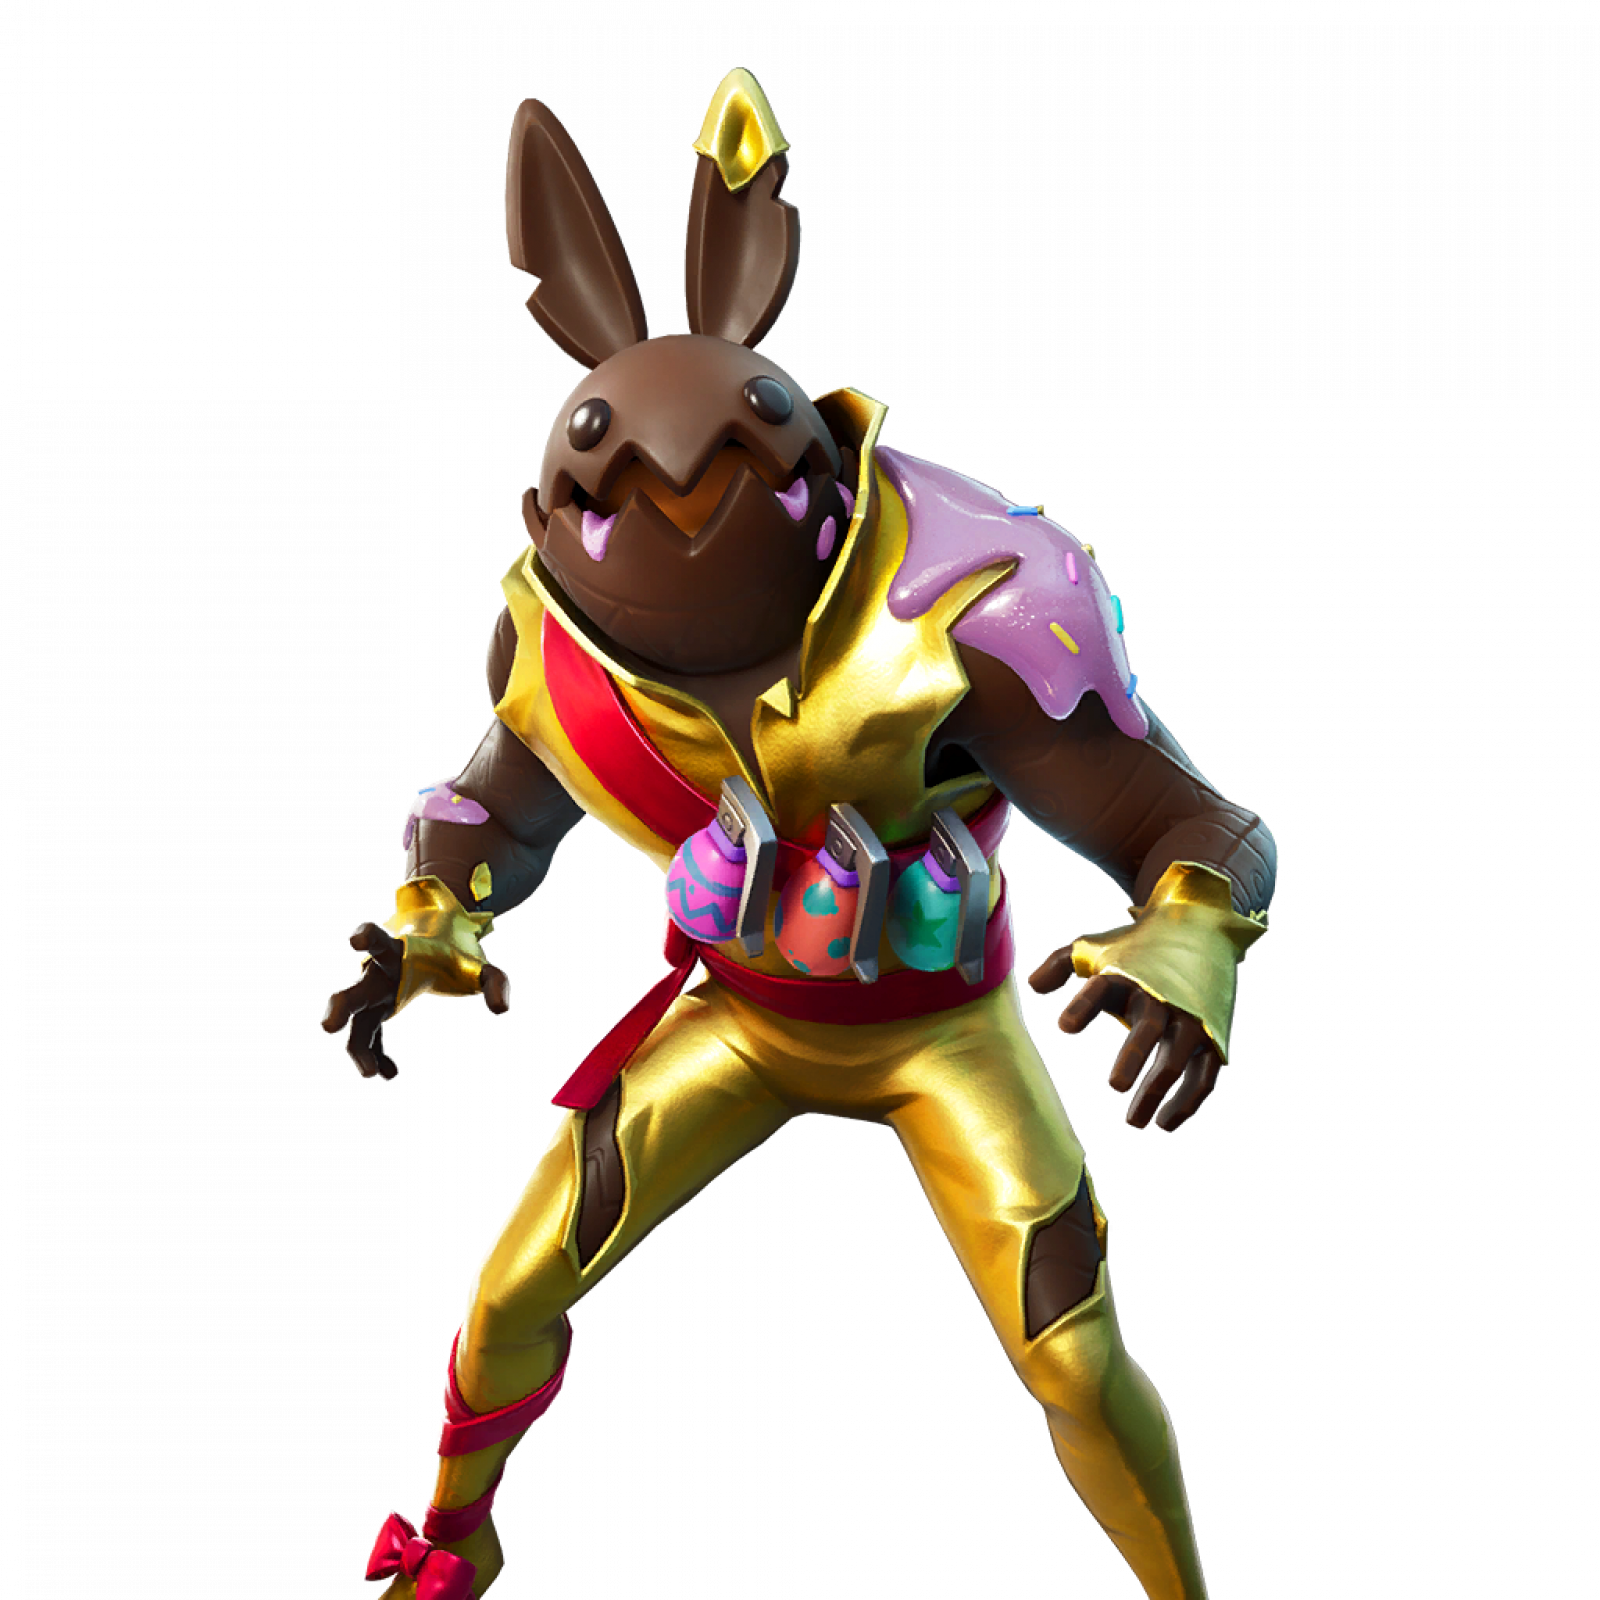 Fortnite' v12.30 Leaked Skins: Celebrate Easter With a Chocolate